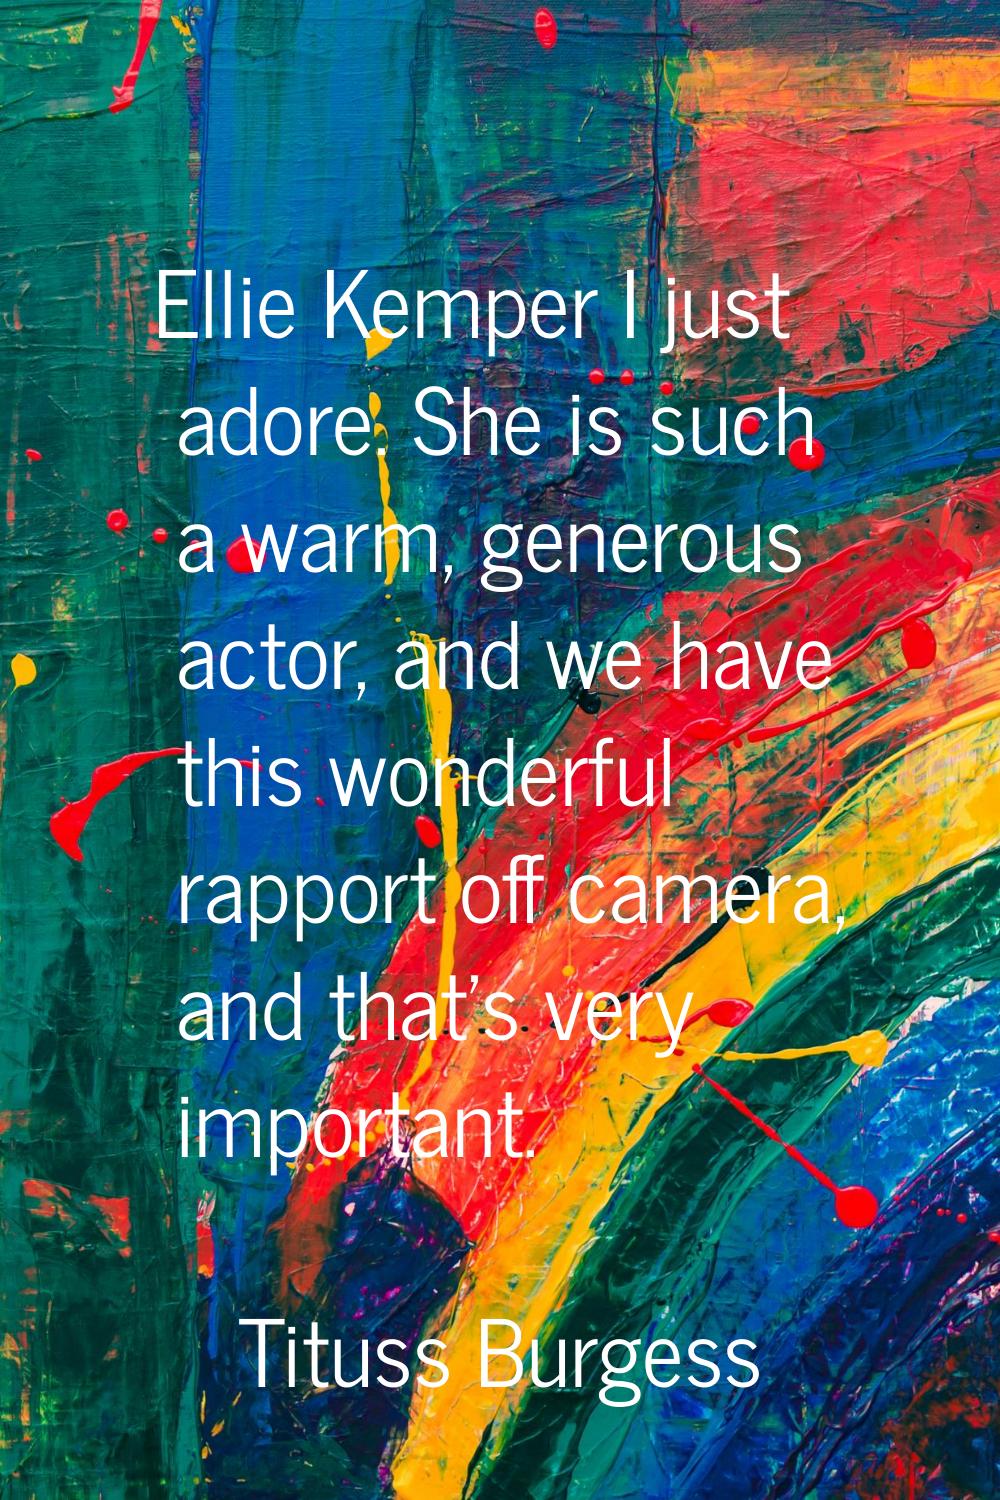 Ellie Kemper I just adore. She is such a warm, generous actor, and we have this wonderful rapport o